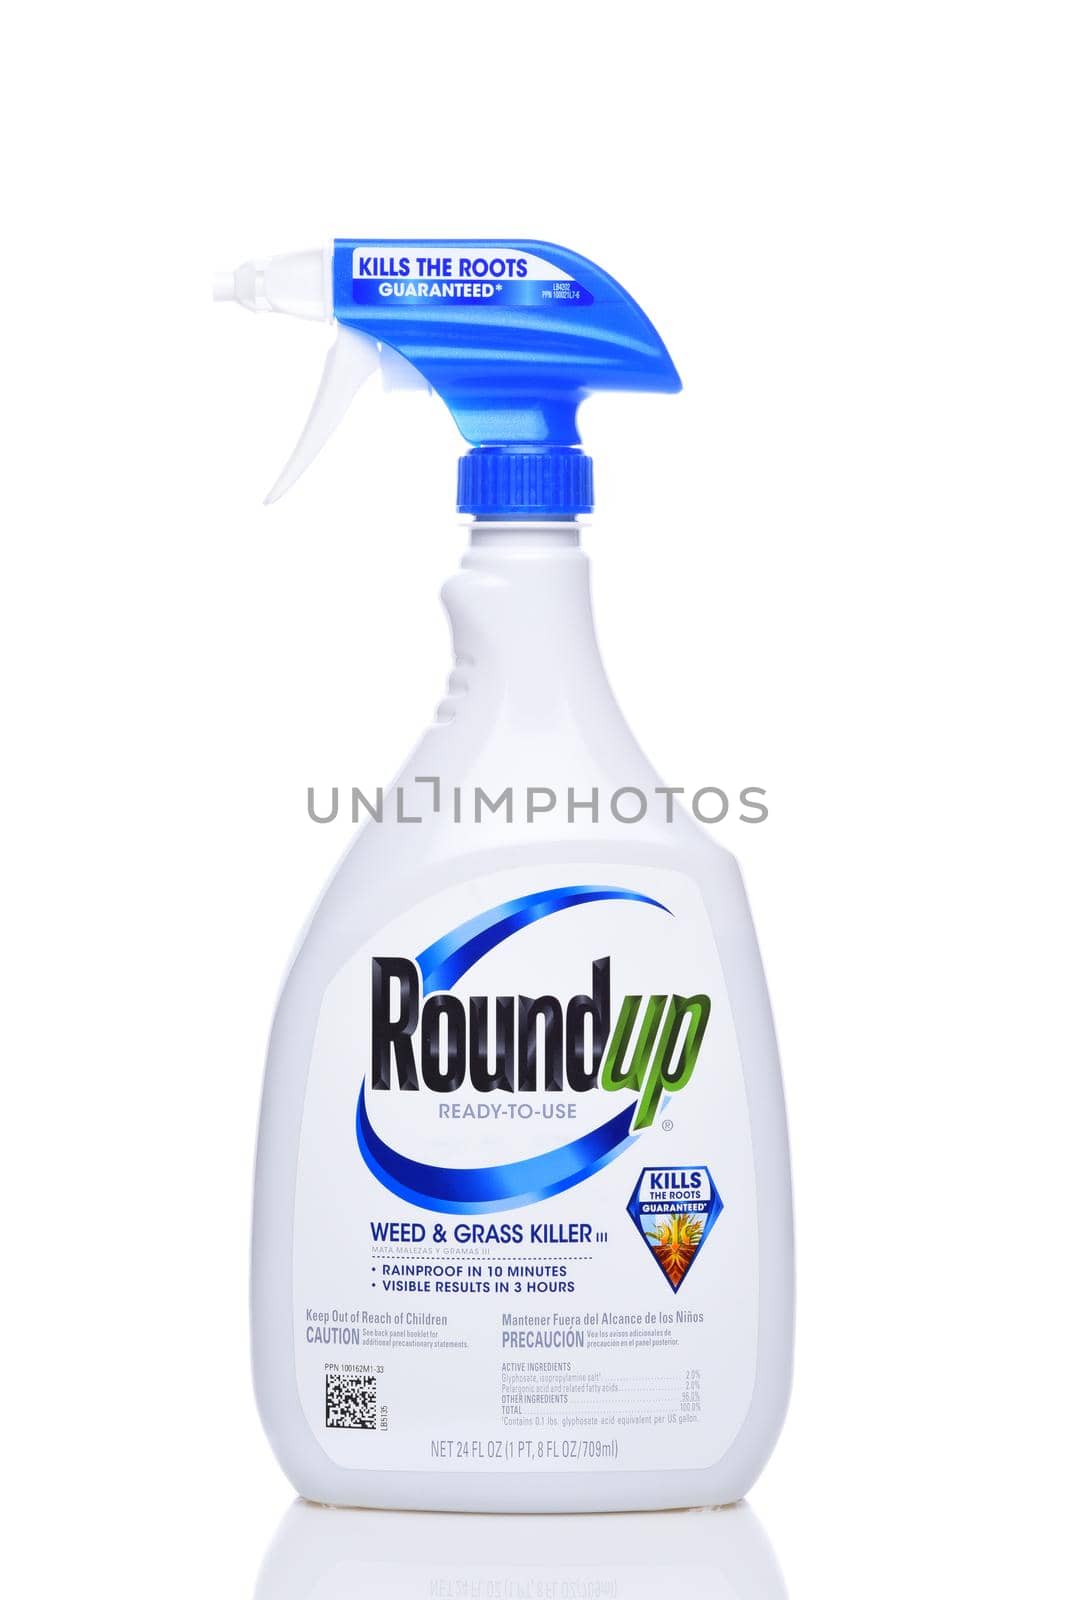 IRVINE, CALIFORNIA - SEPT 6, 2018: Bottle of Roundup Weed and Grass Killer. The controversial product from Monsanto contains the cancer causing chemical Glyphosate.